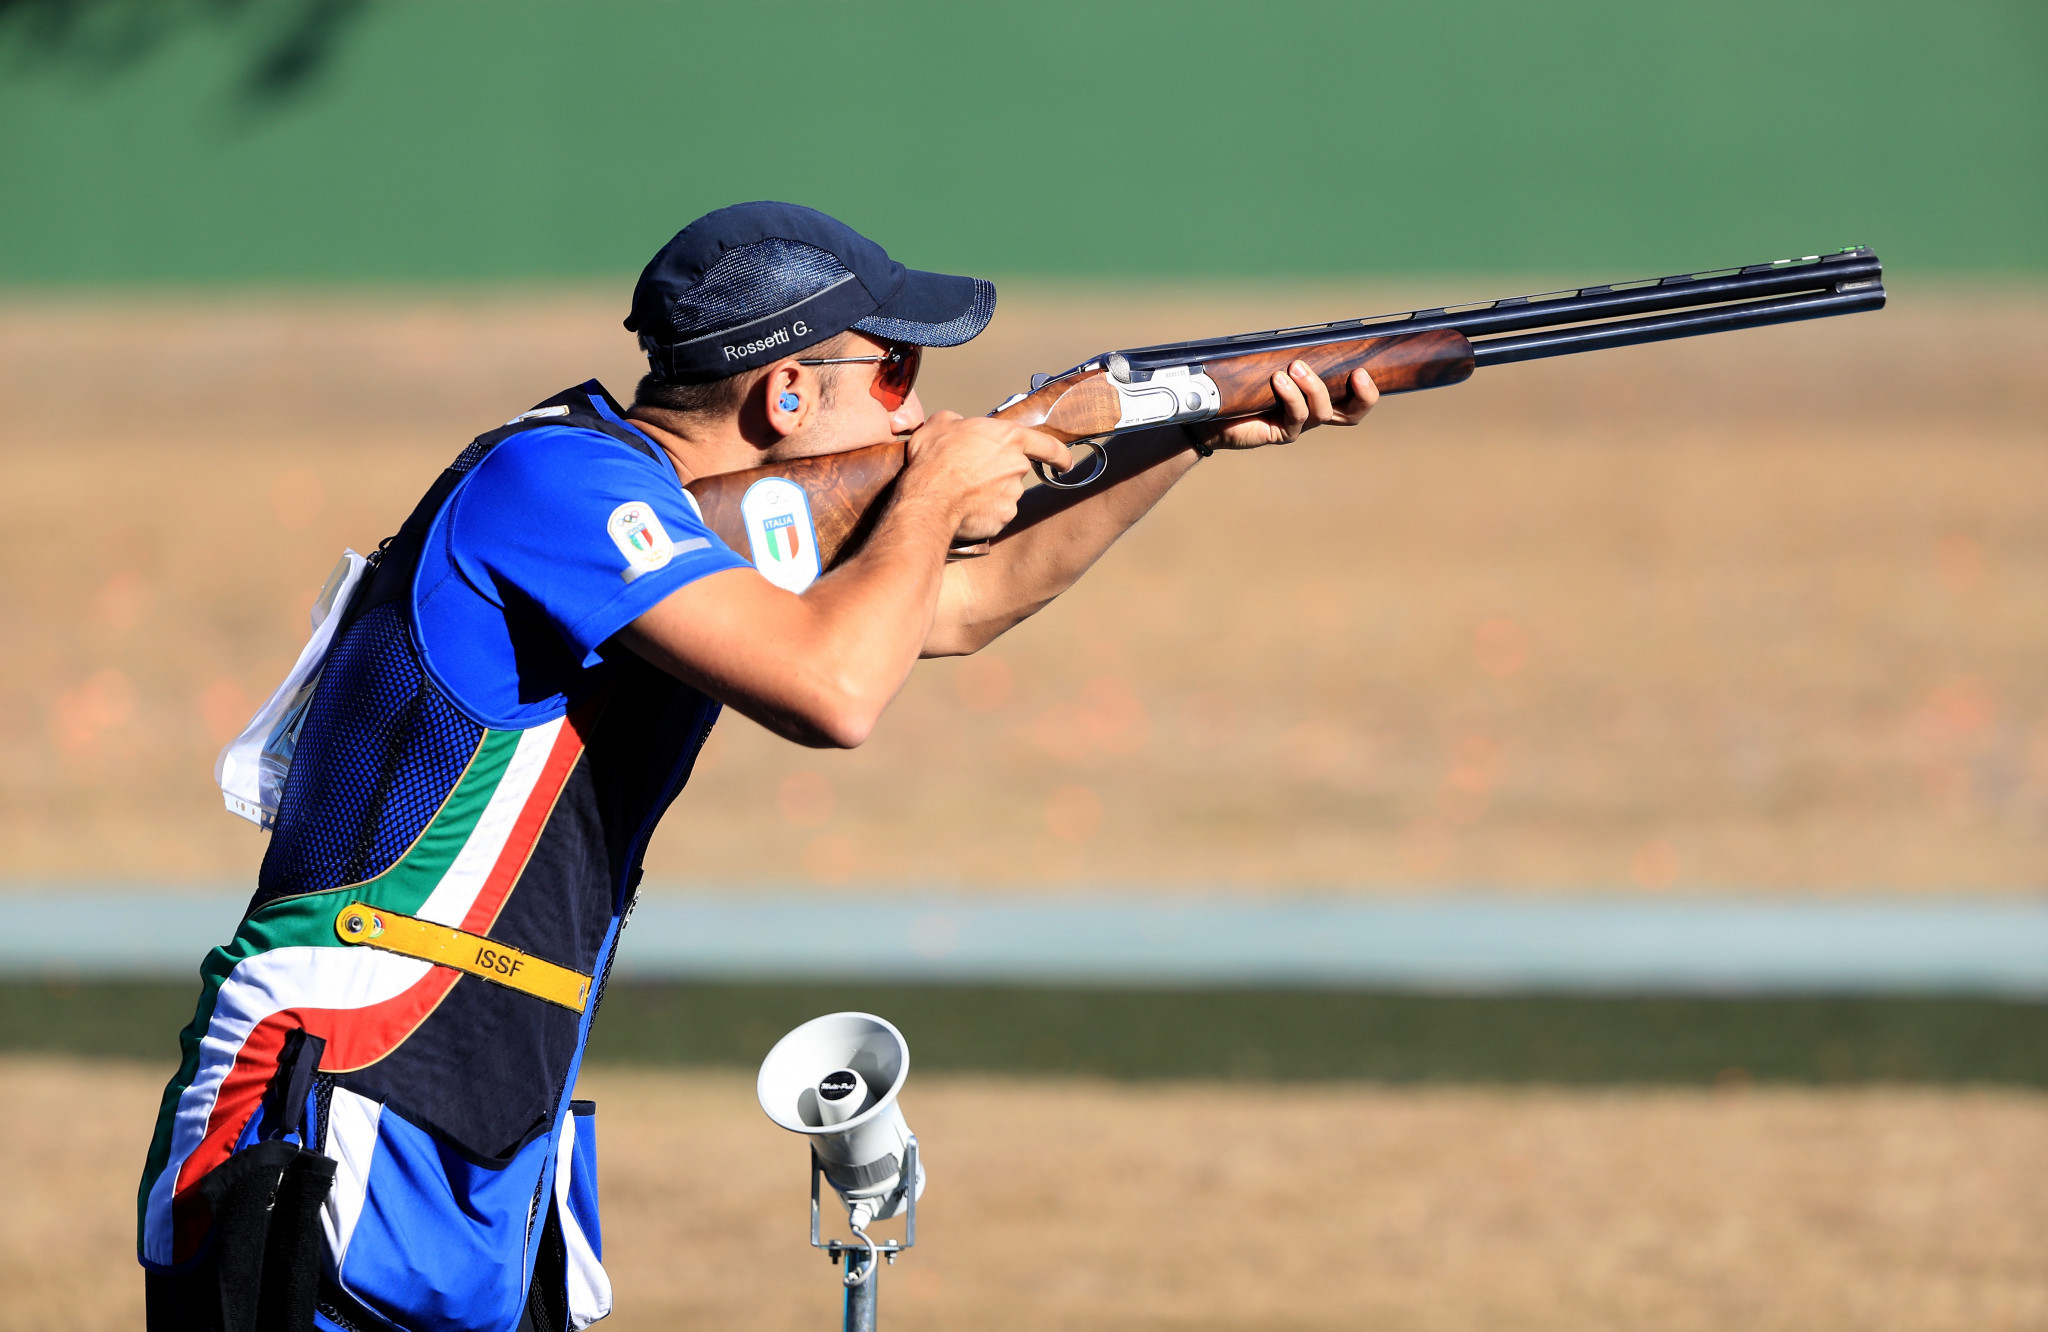 Rio 2016 Olympic champion Gabriele Rossetti contributed to Italy's men's team skeet victory at the ISSF Shotgun World Cup in Nicosia ©Getty Images